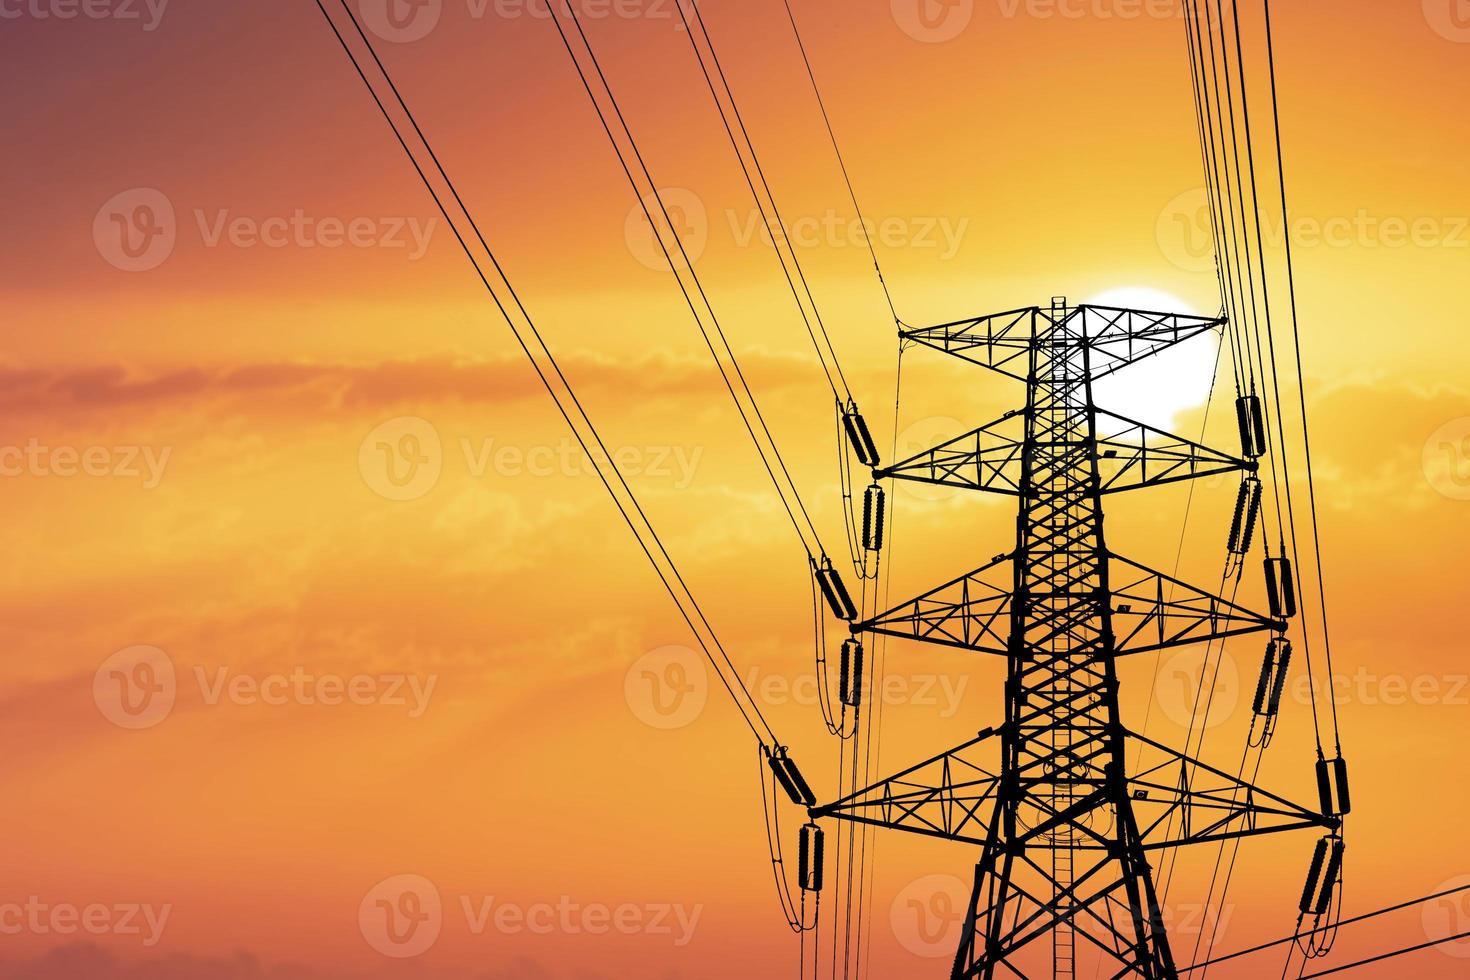 Silhouette of high voltage poles with electric wires. Silhouette of high voltage power line cables in an orange evening sunset. Steel structure of electric poles. electric power transmission concept photo